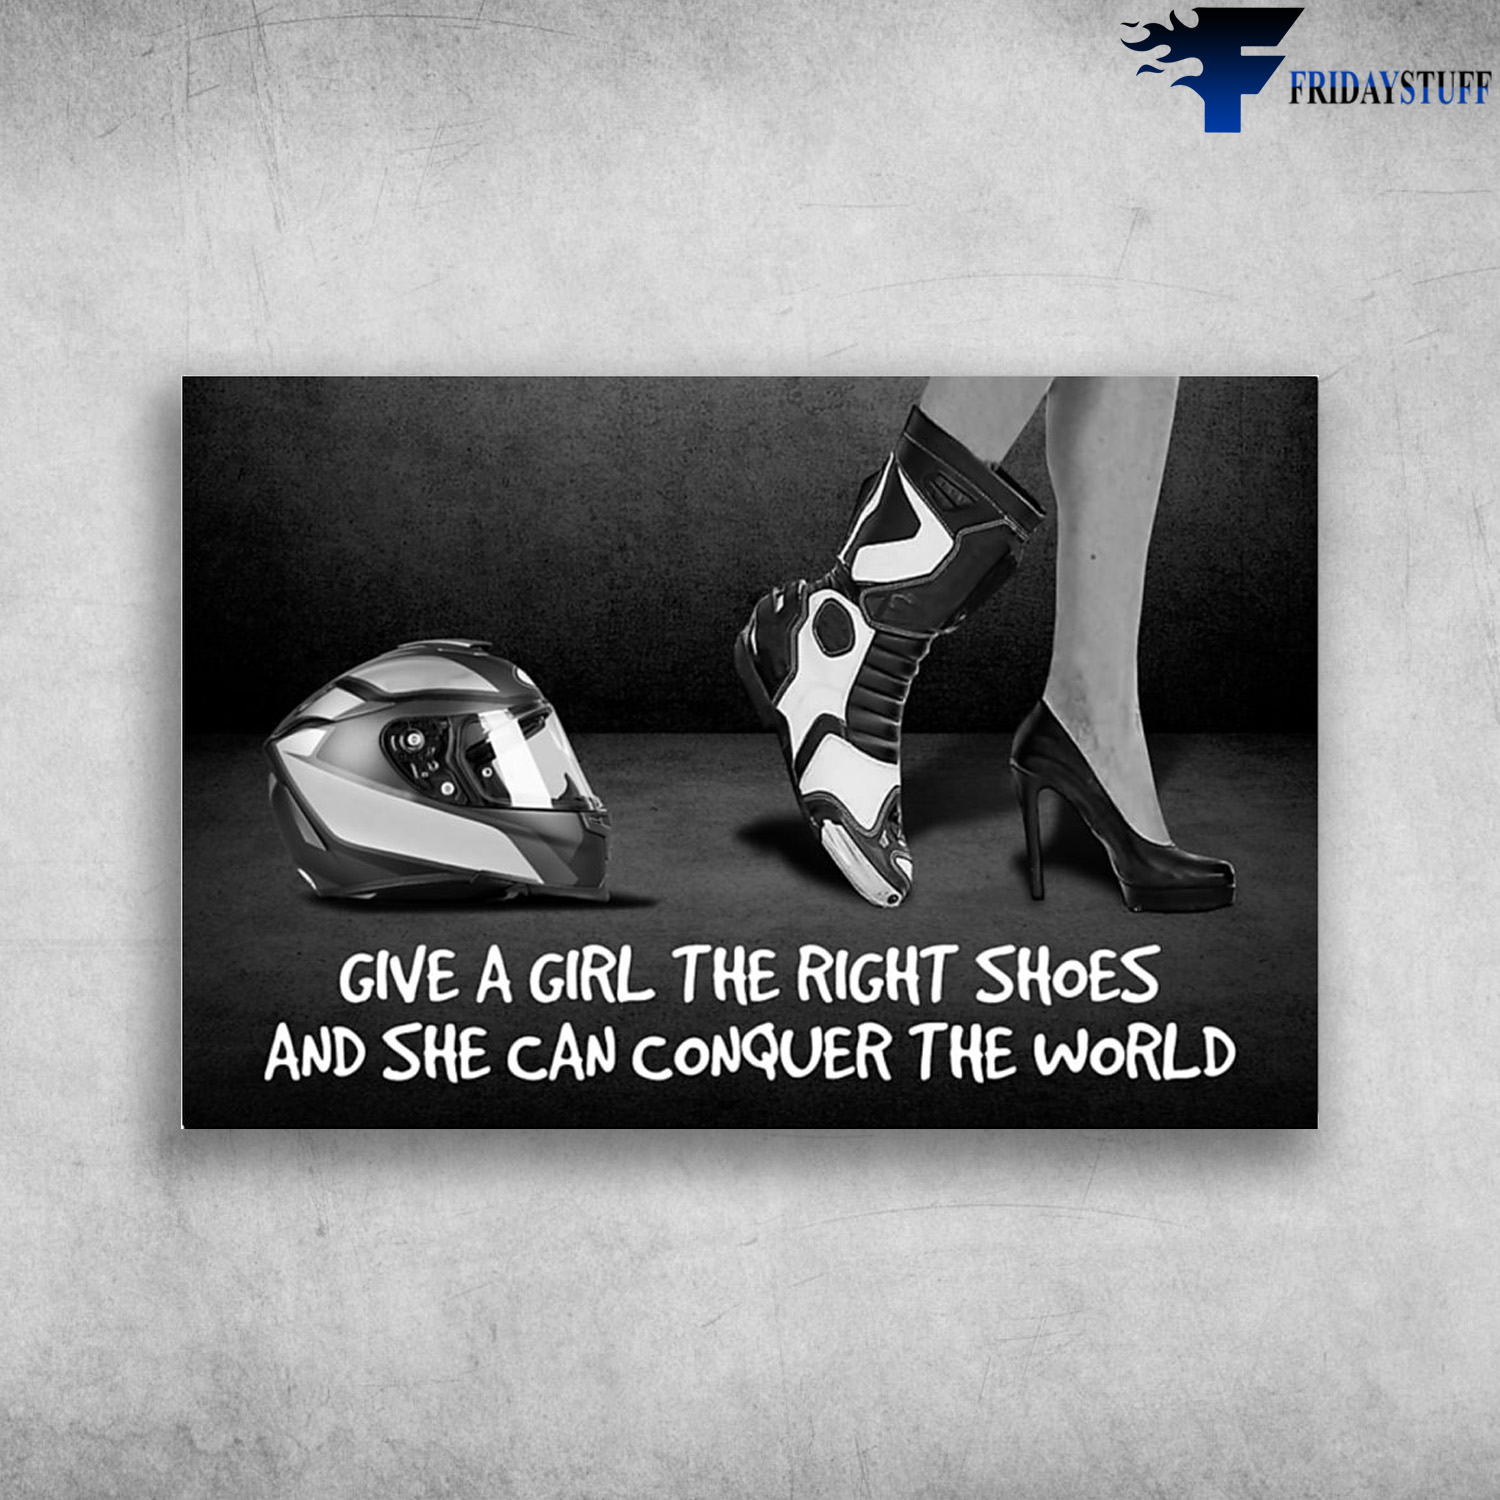 Girl Witth Helmets And Motorcycle Shoes - Give A Girl The Right Shoes, And She Can Conquer The World